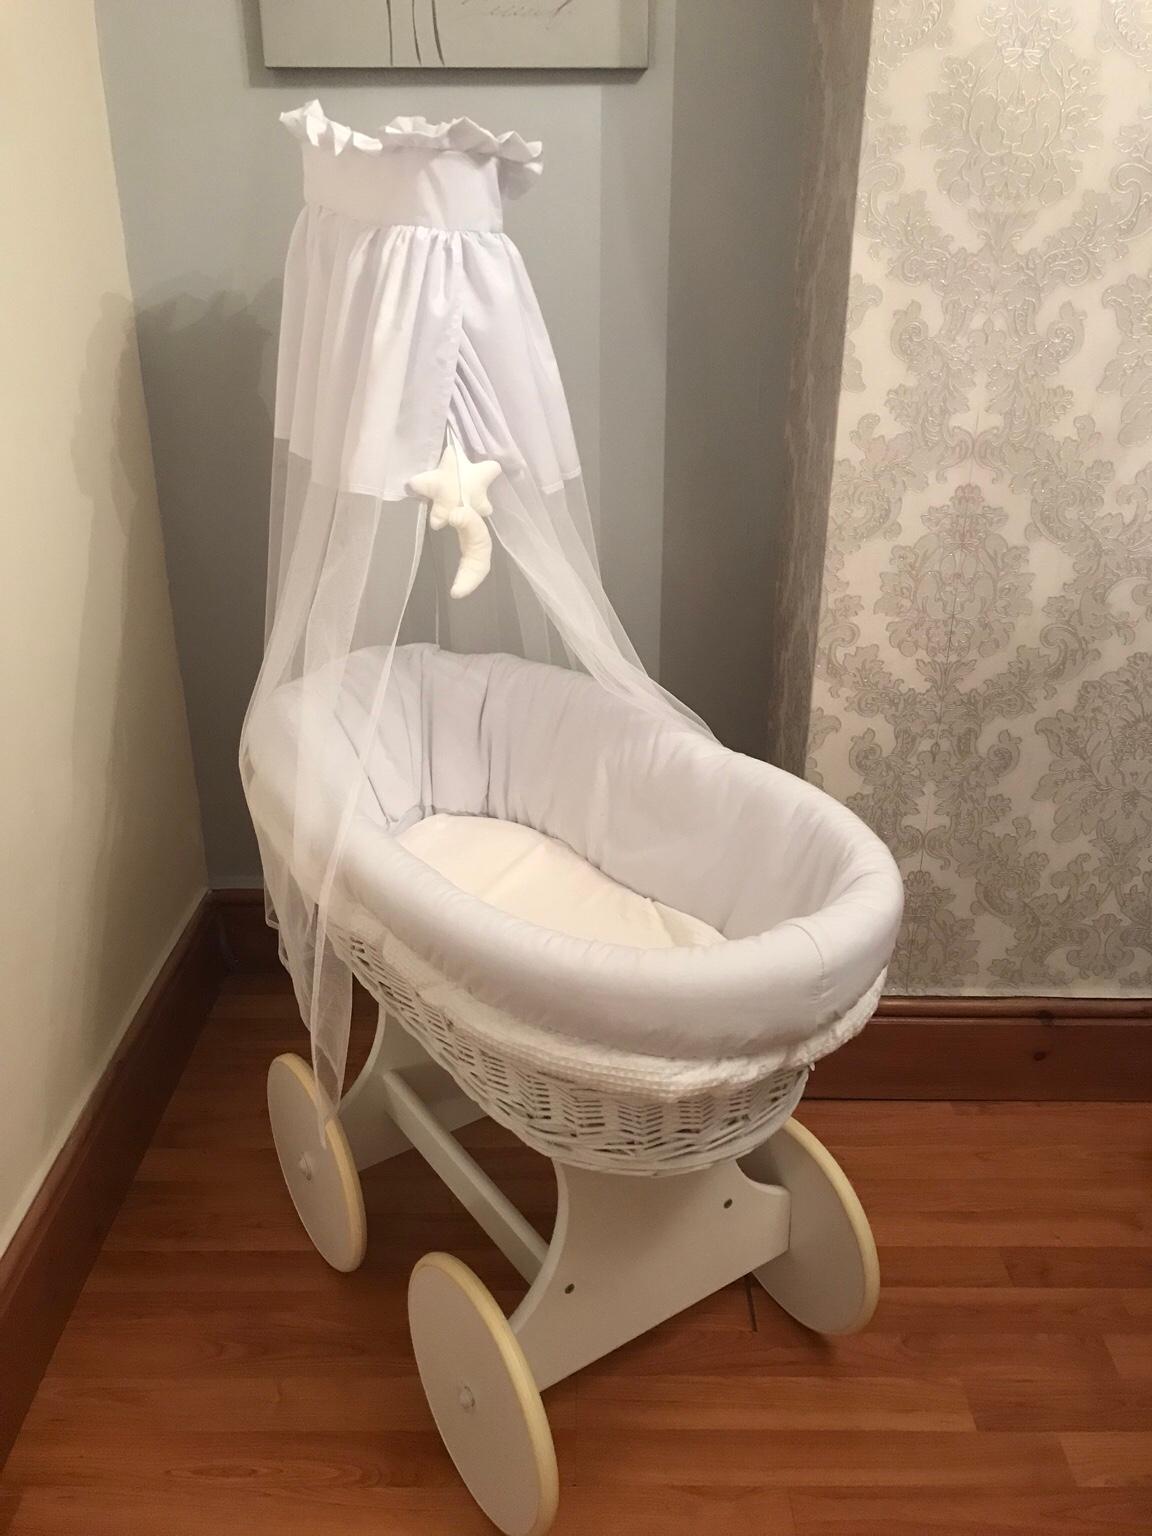 BEDDING CHASSIS DRAPE 2 COLOURS PINK WICKER MOSES BASKET BIG WHEELS